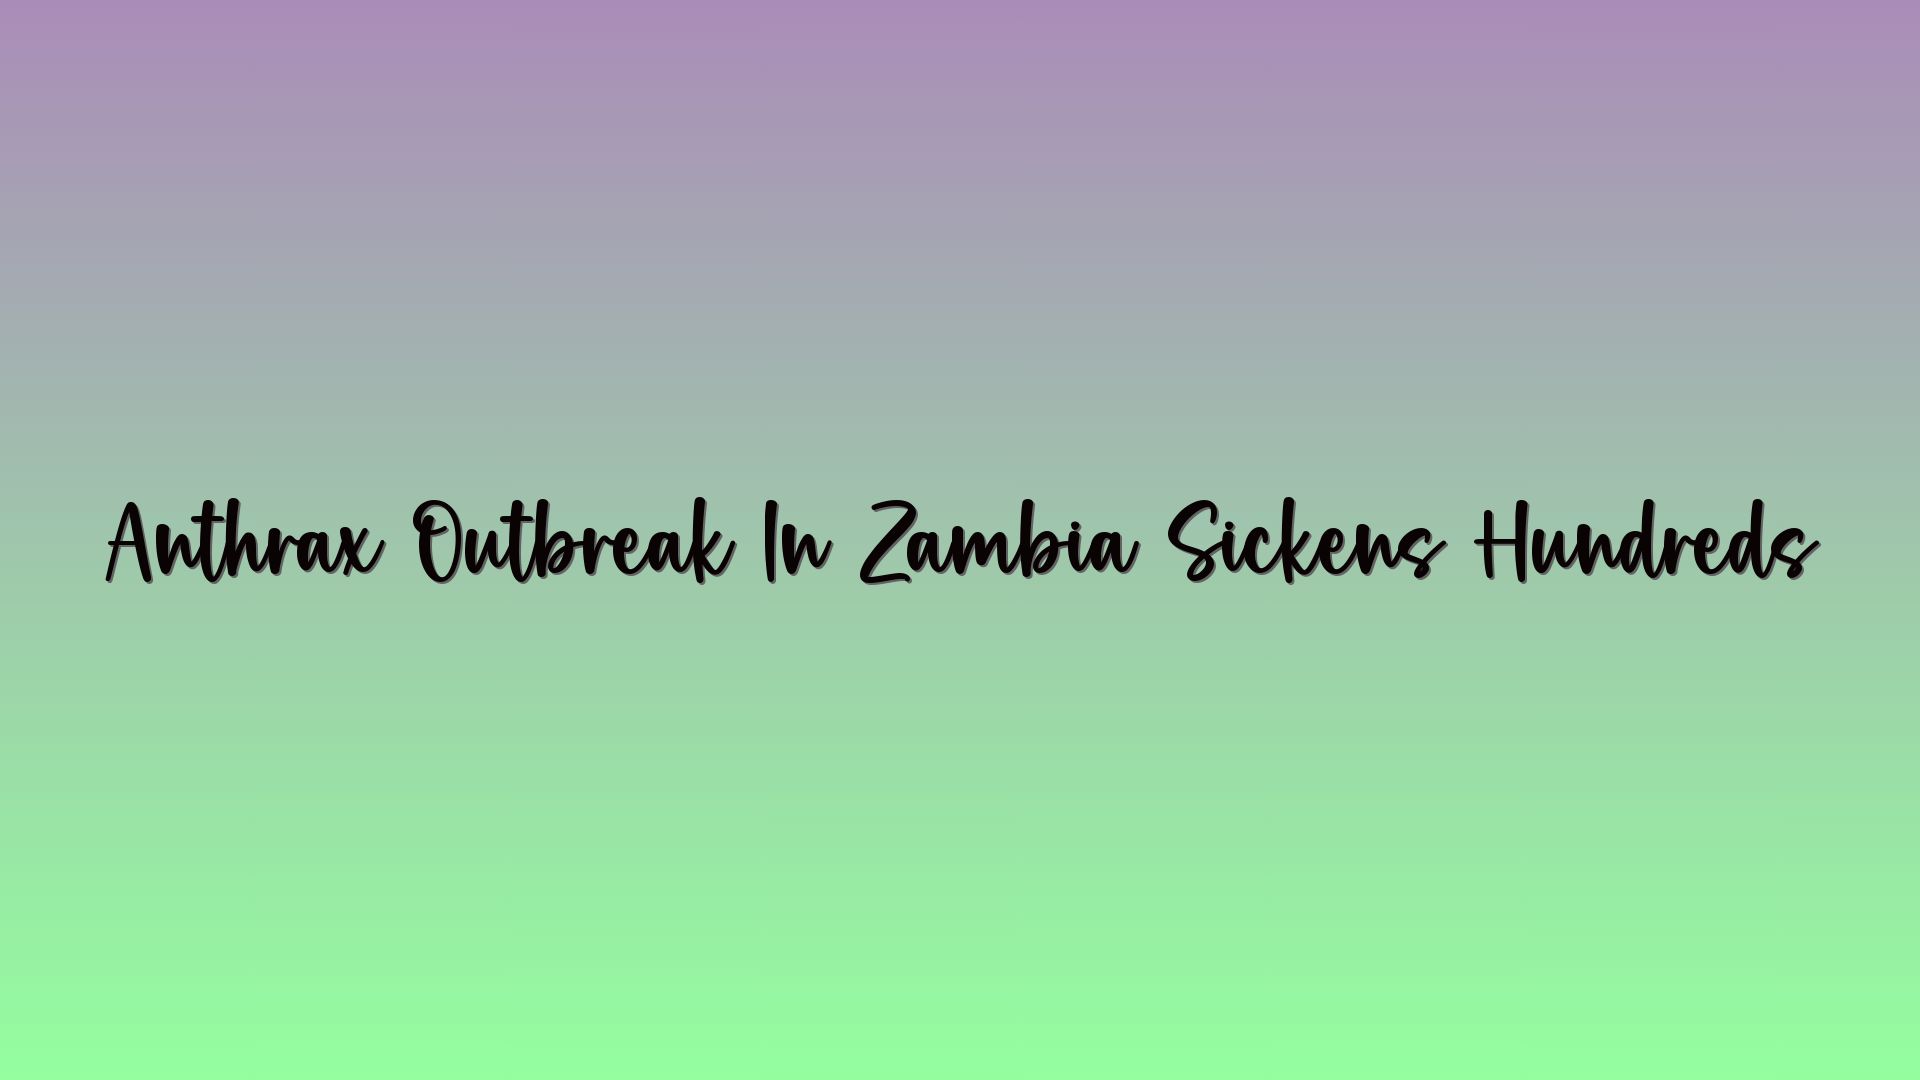 Anthrax Outbreak In Zambia Sickens Hundreds